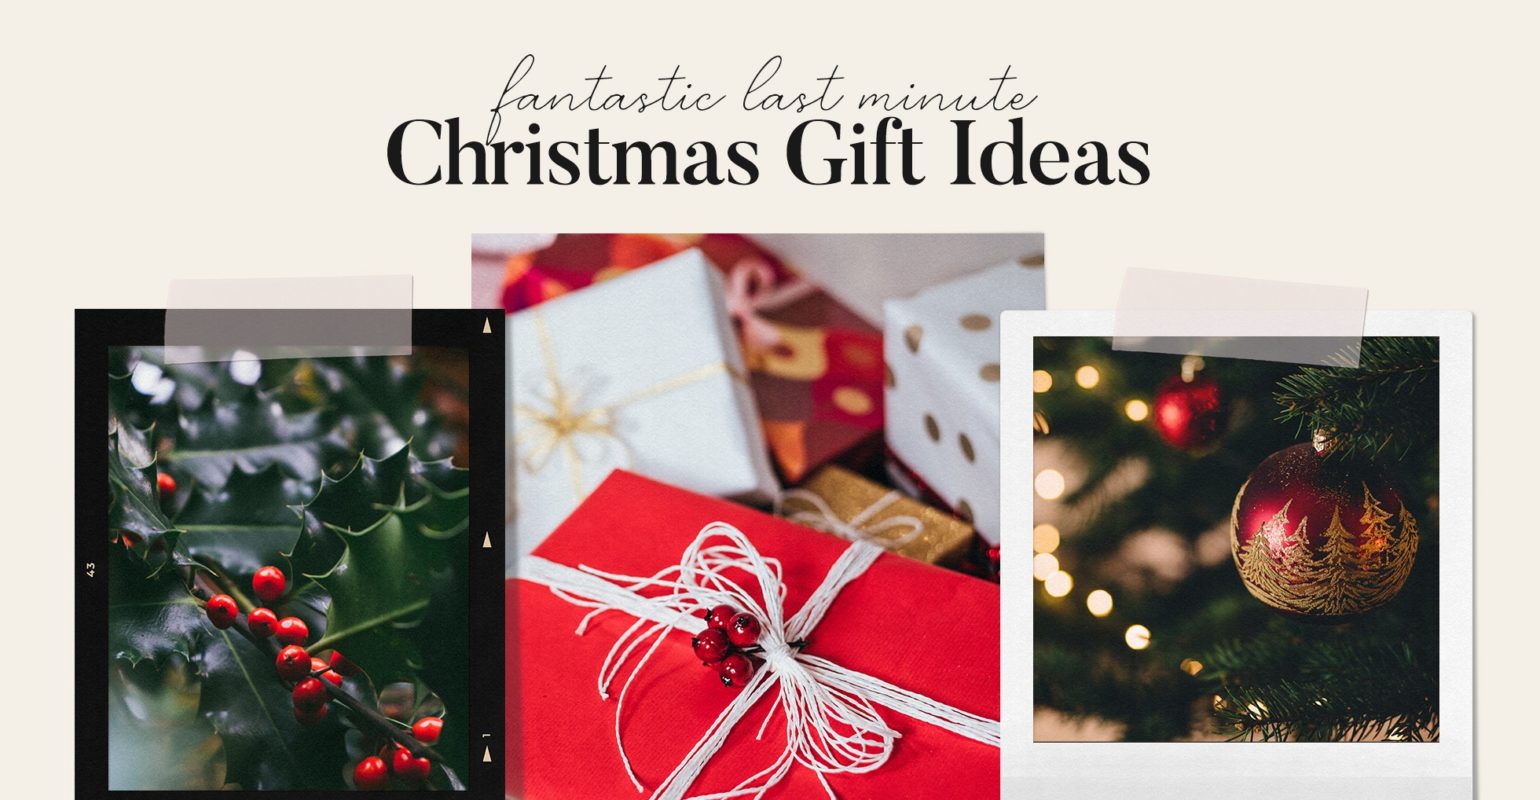 Best Last Minute Christmas Gifts